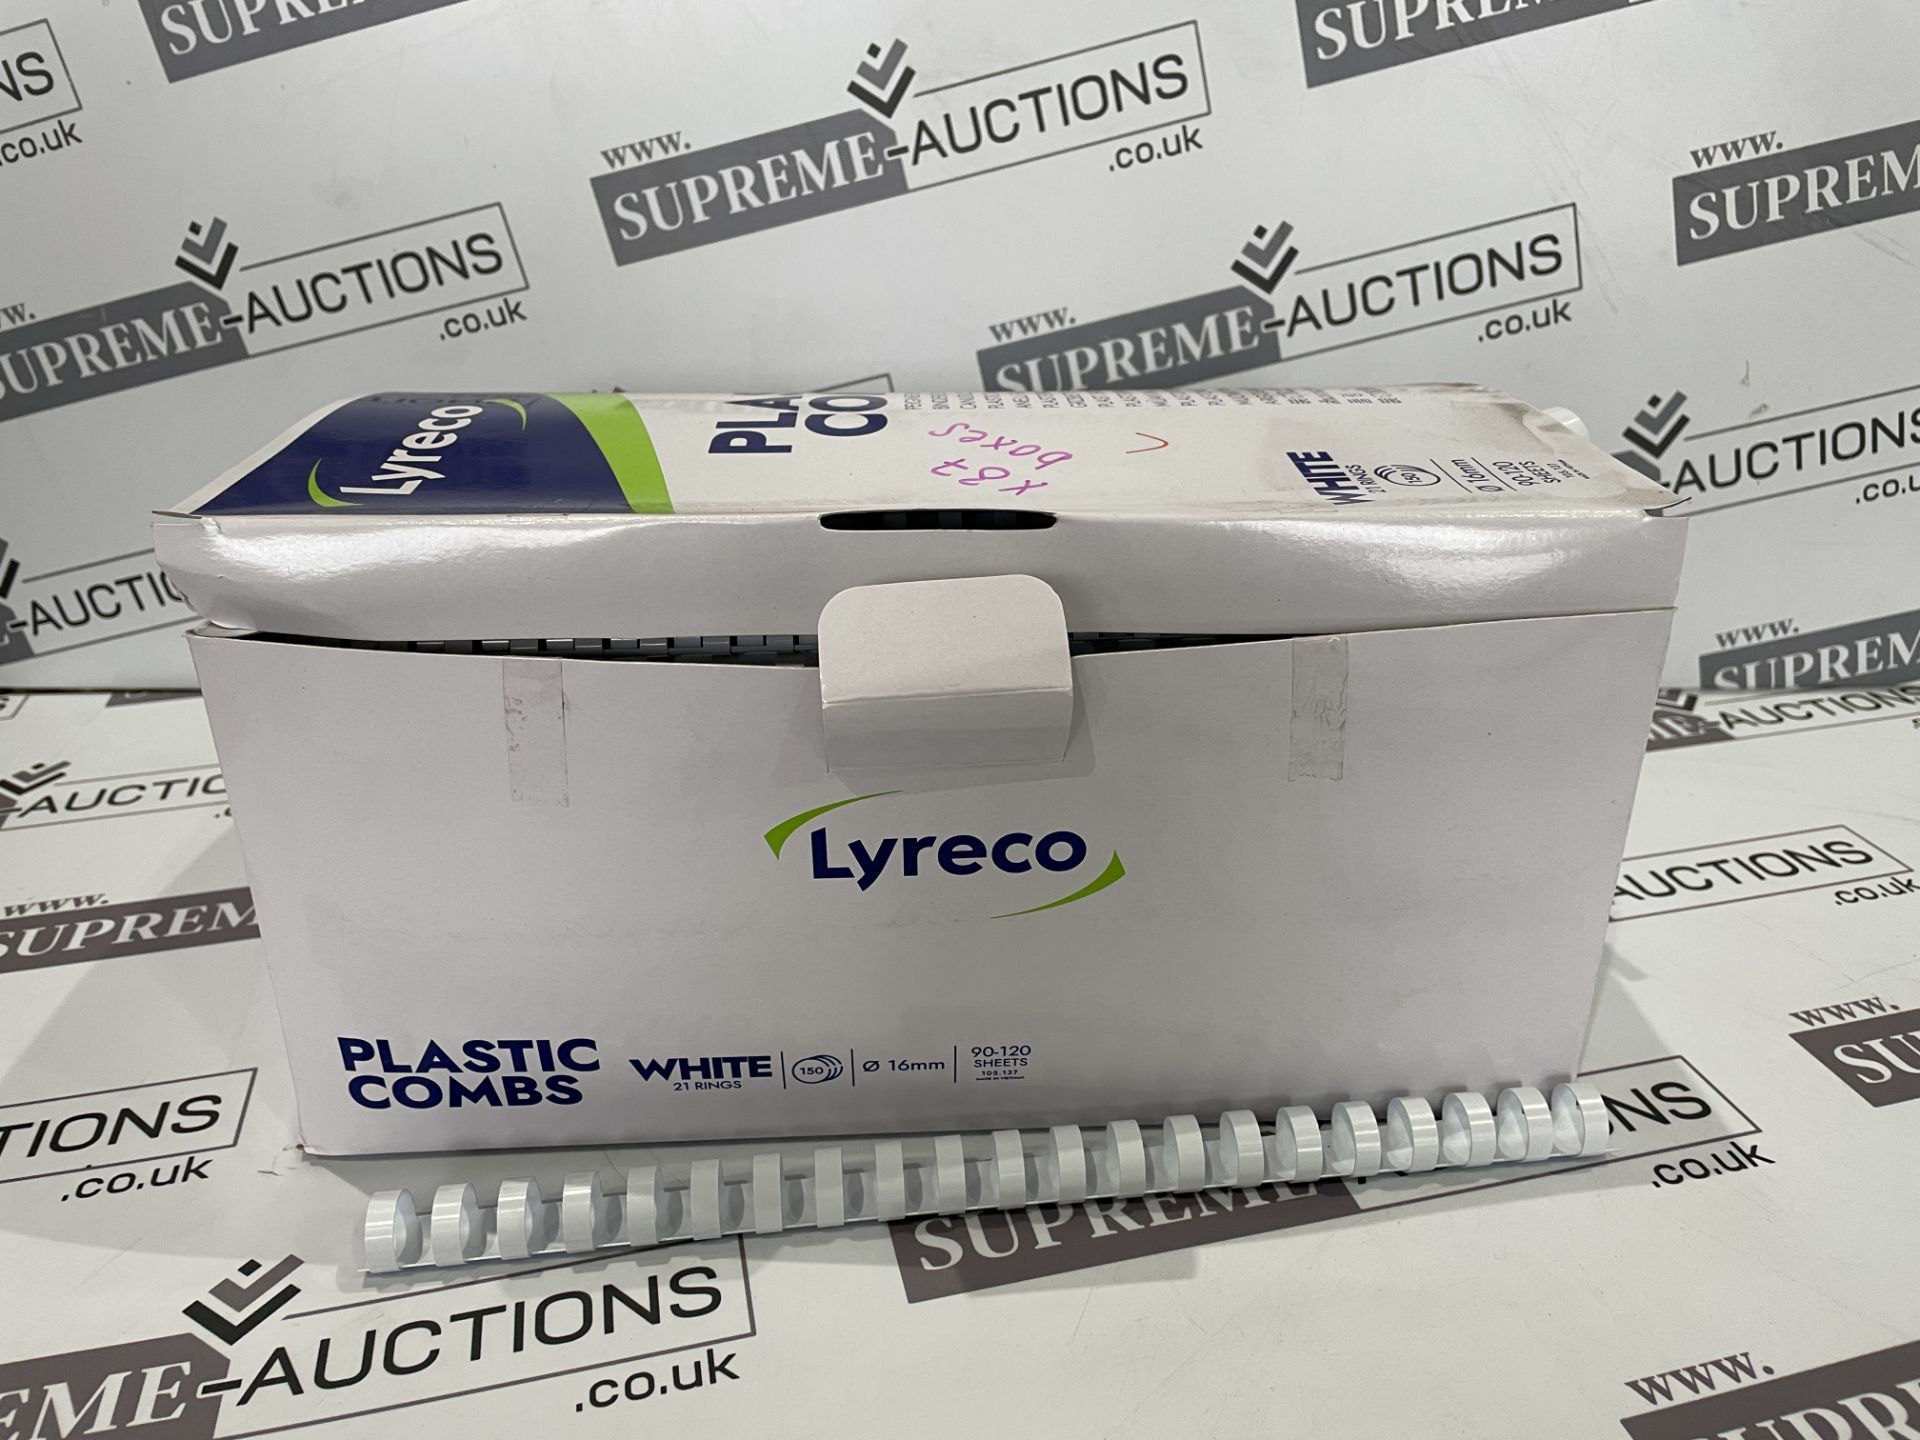 19 X BRAND NEW PACKS OF 150 LYRECO PLASTIC COMBS 90-120 SHEETS R15-9